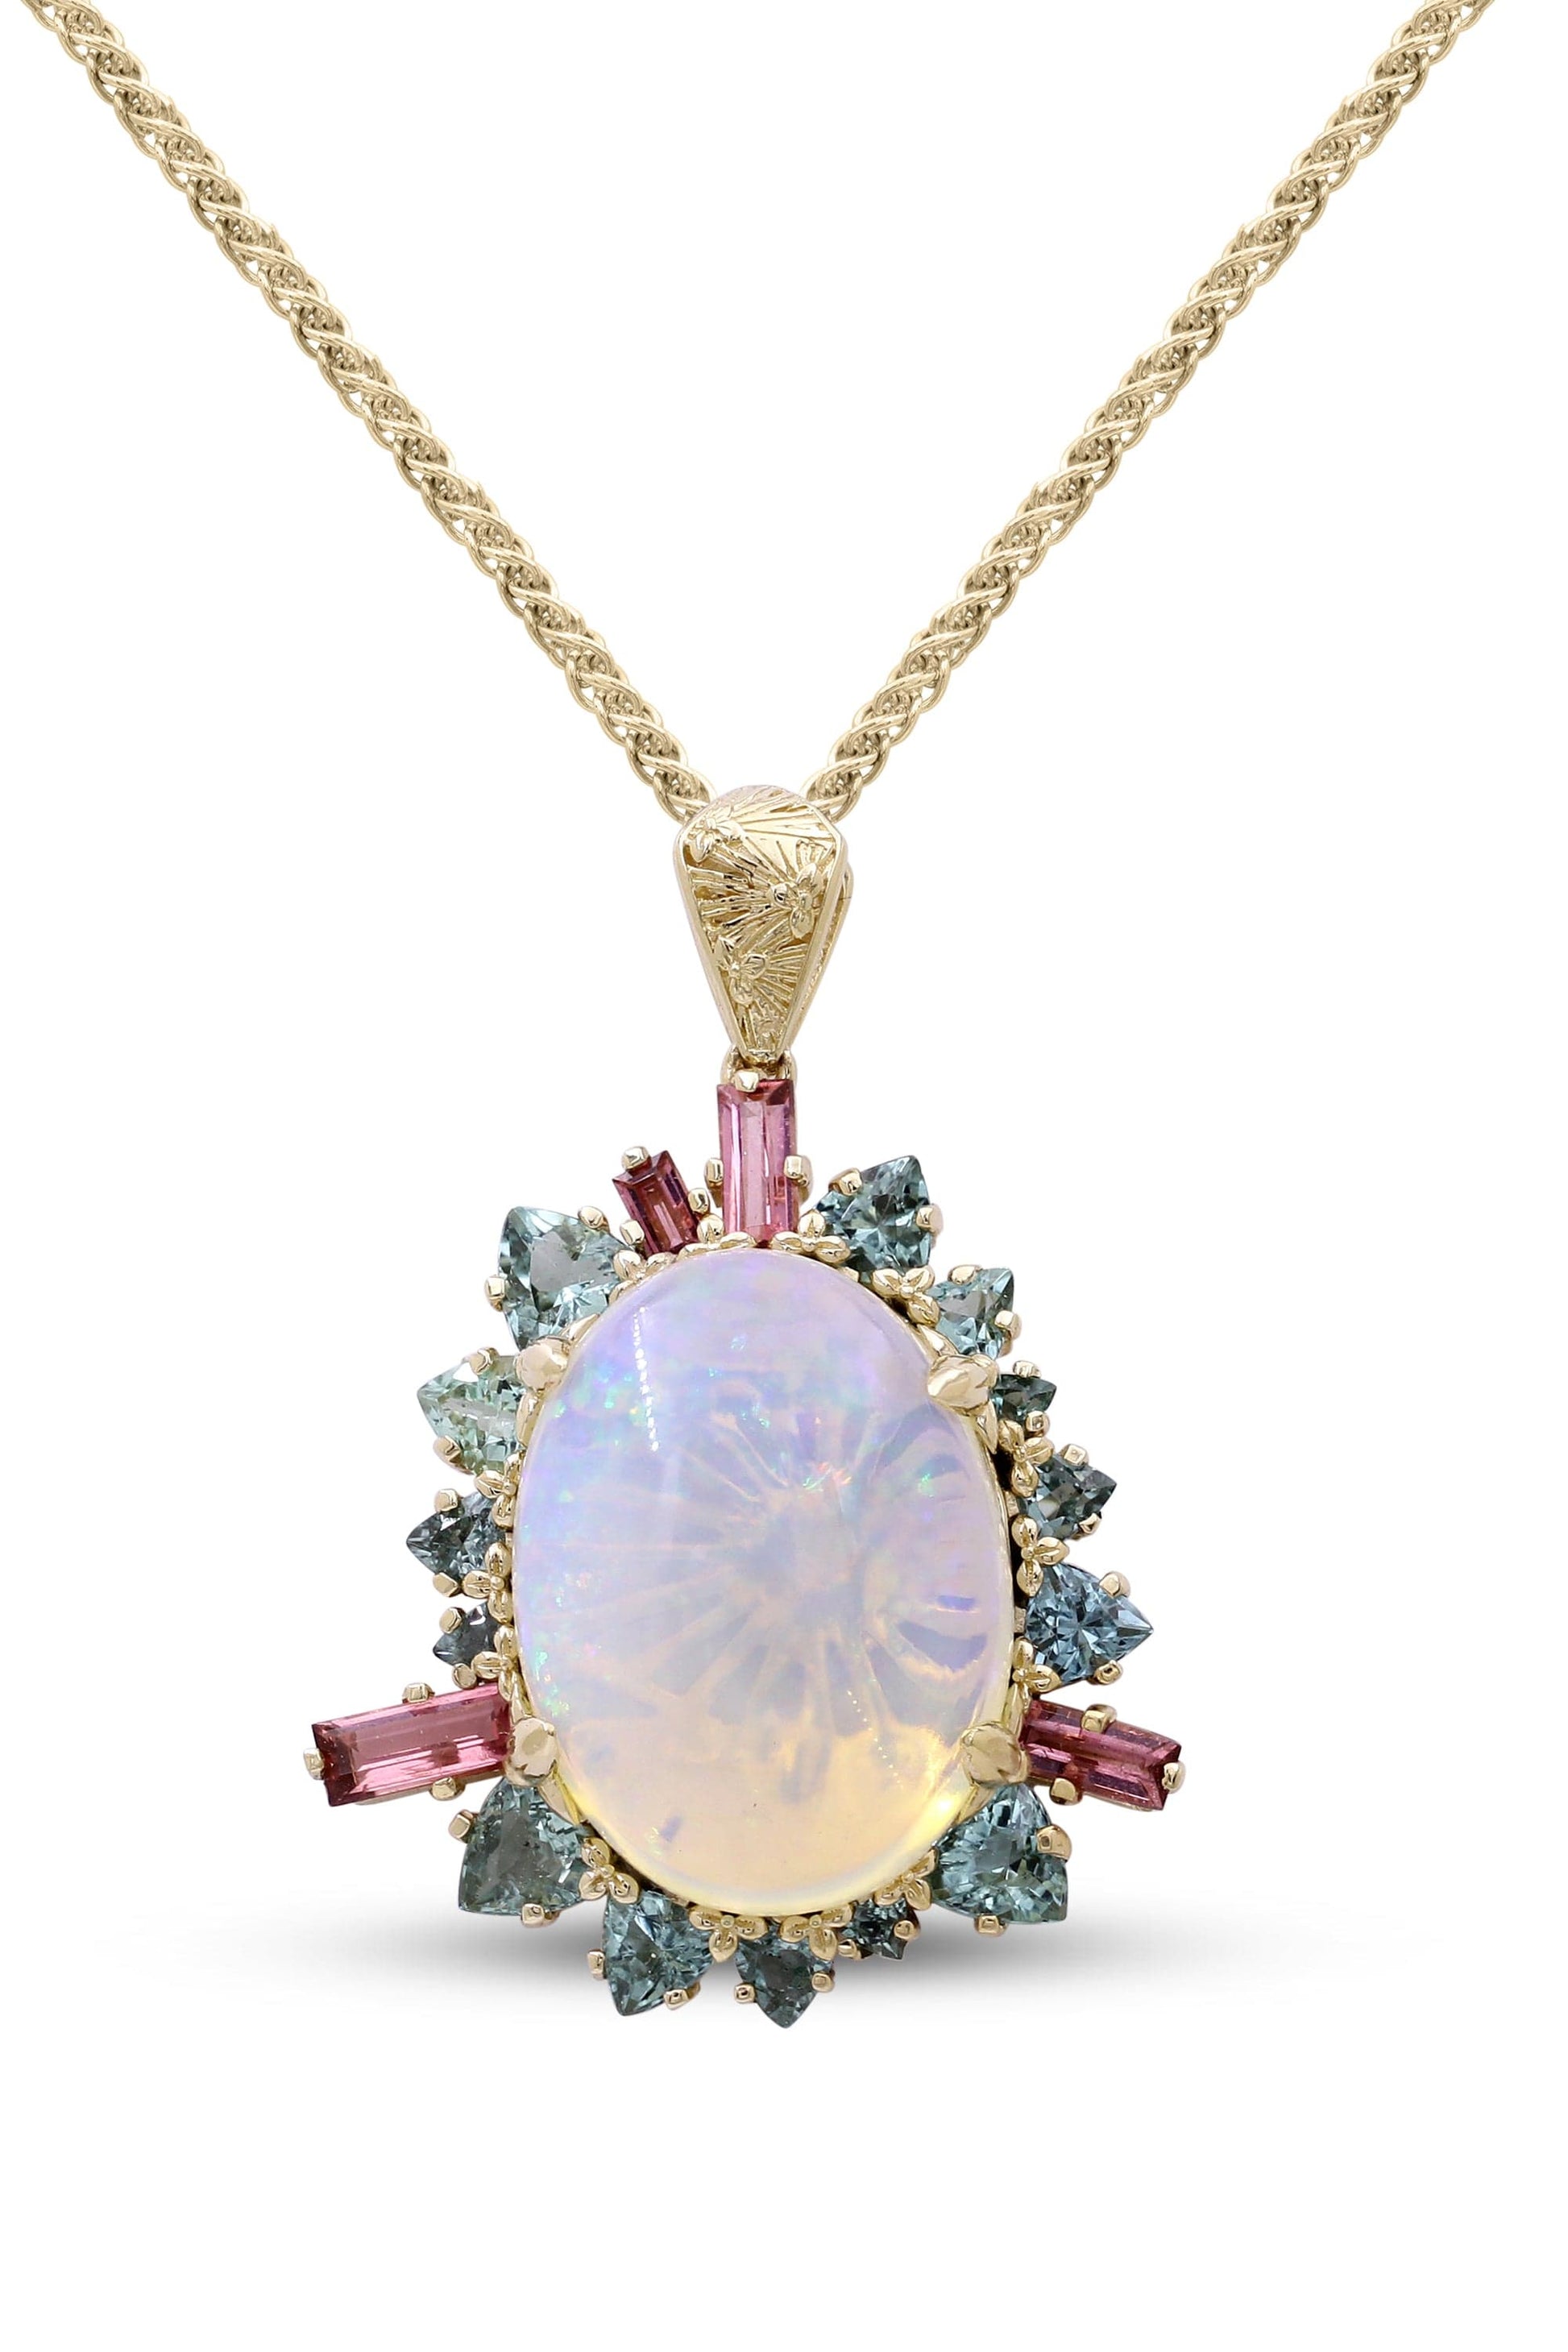 STEPHEN DWECK-Opal and Tourmaline Necklace-YELLOW GOLD